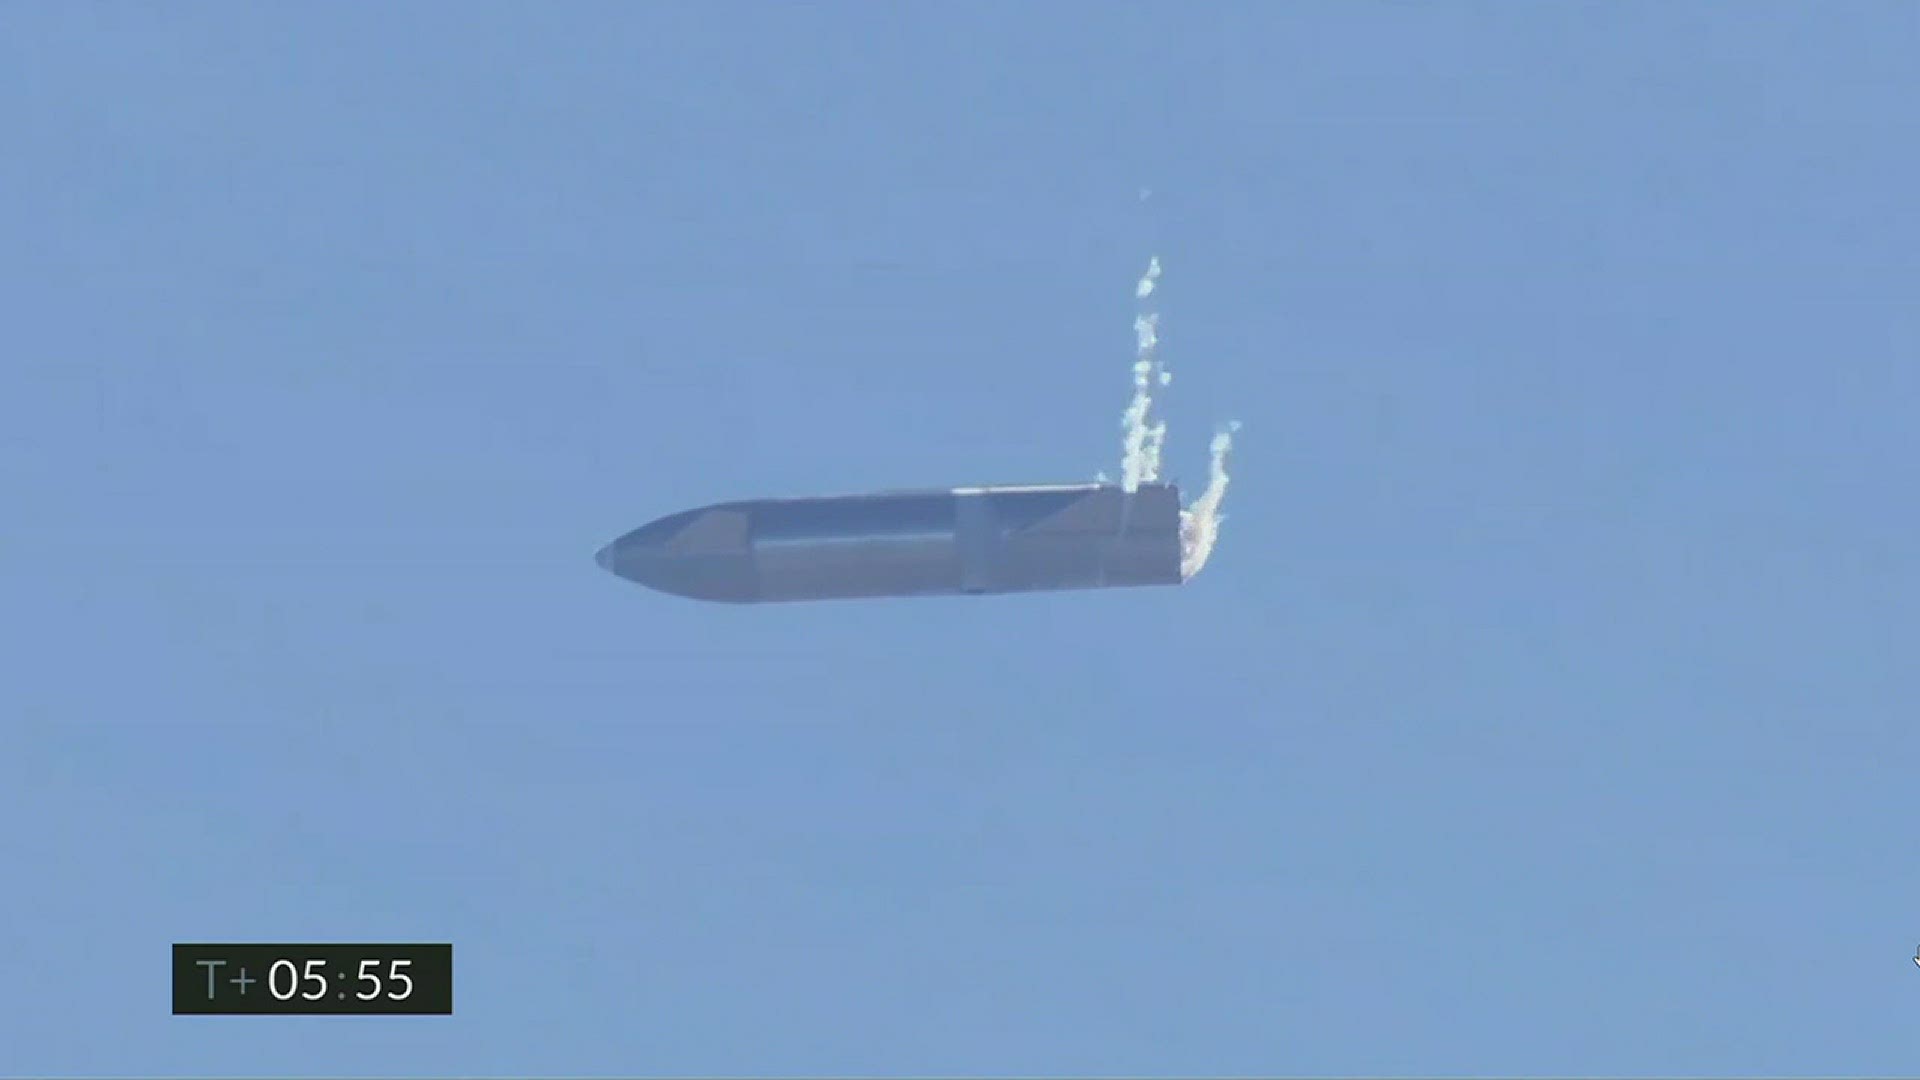 The SpaceX test flight on February 2 ended in an explosion.